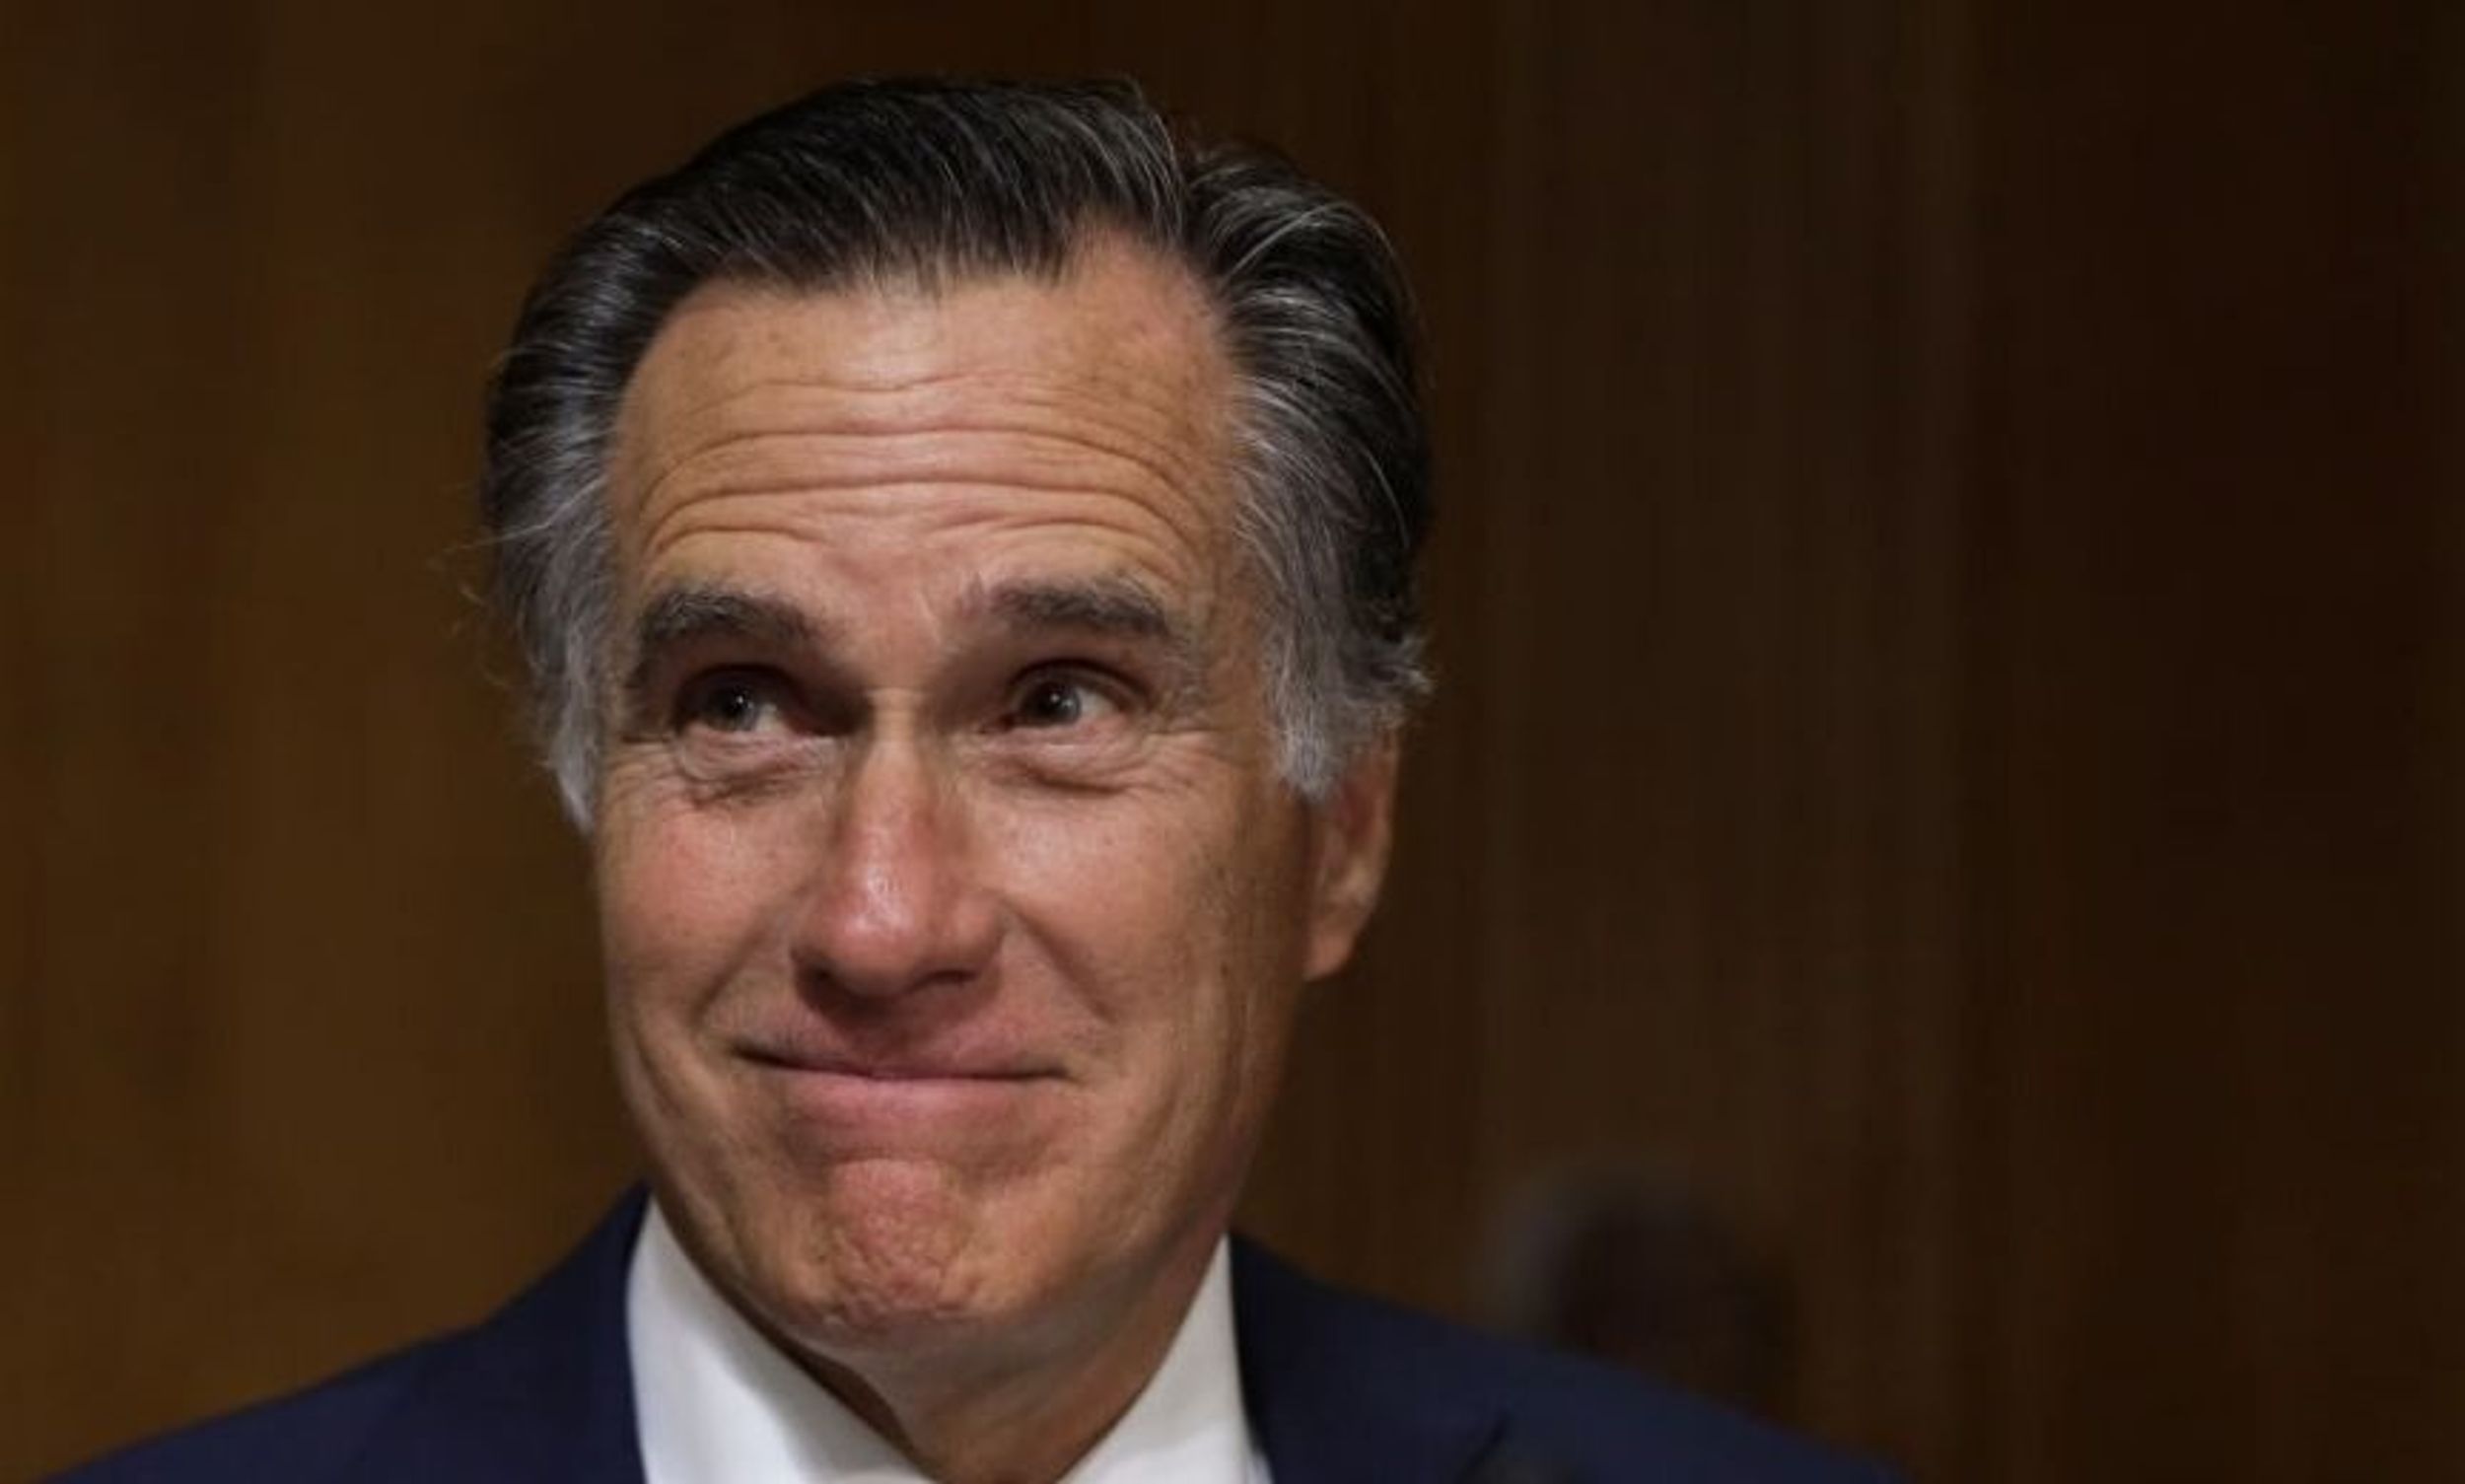 Mitt Romney's Own Grandson Trolled Him With A 'Pierre Delecto' Halloween Costume